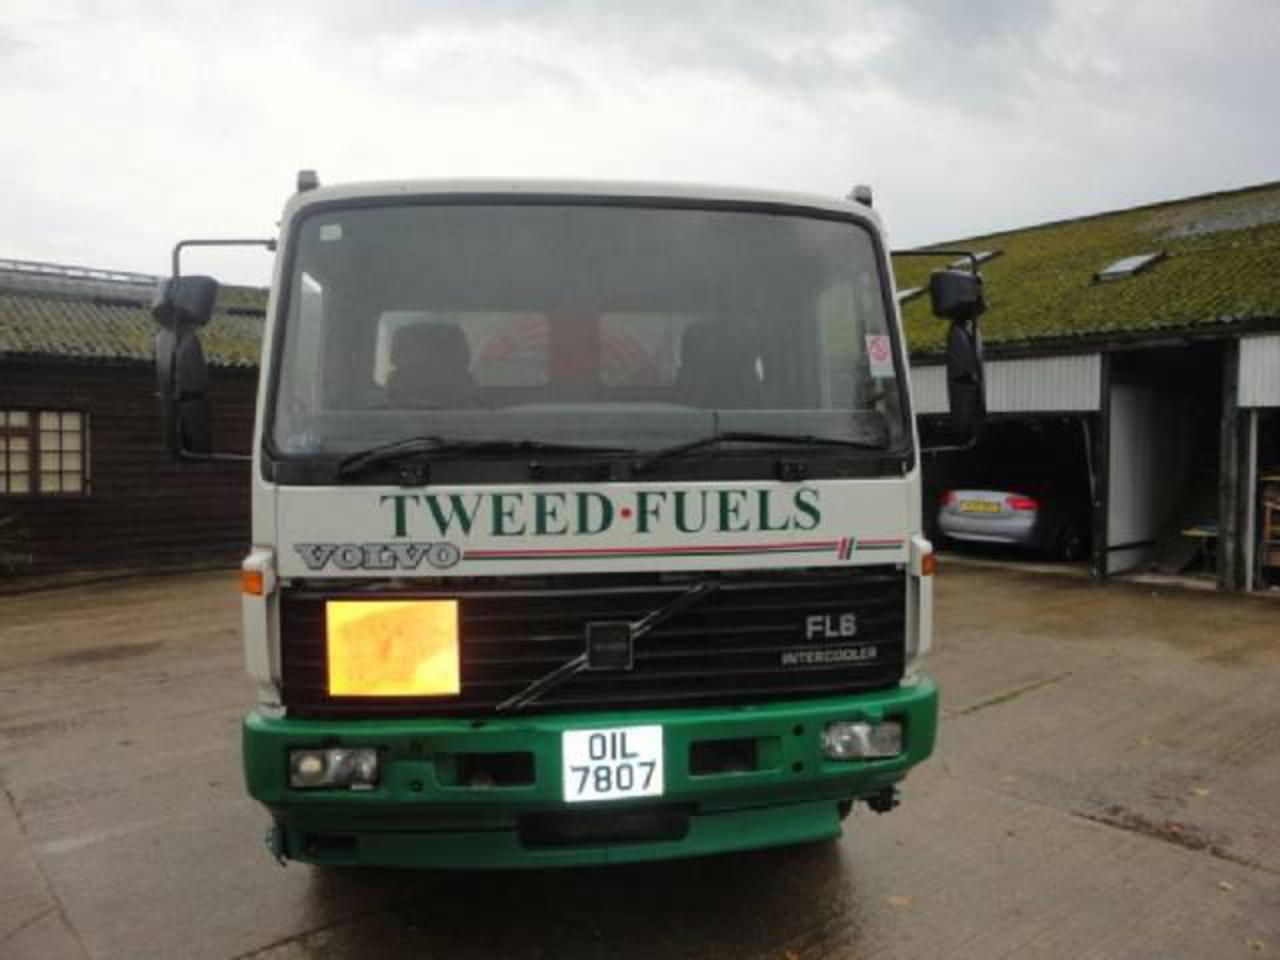 Volvo F6 Turbo Fuel Tanker. View Download Wallpaper. 640x480. Comments